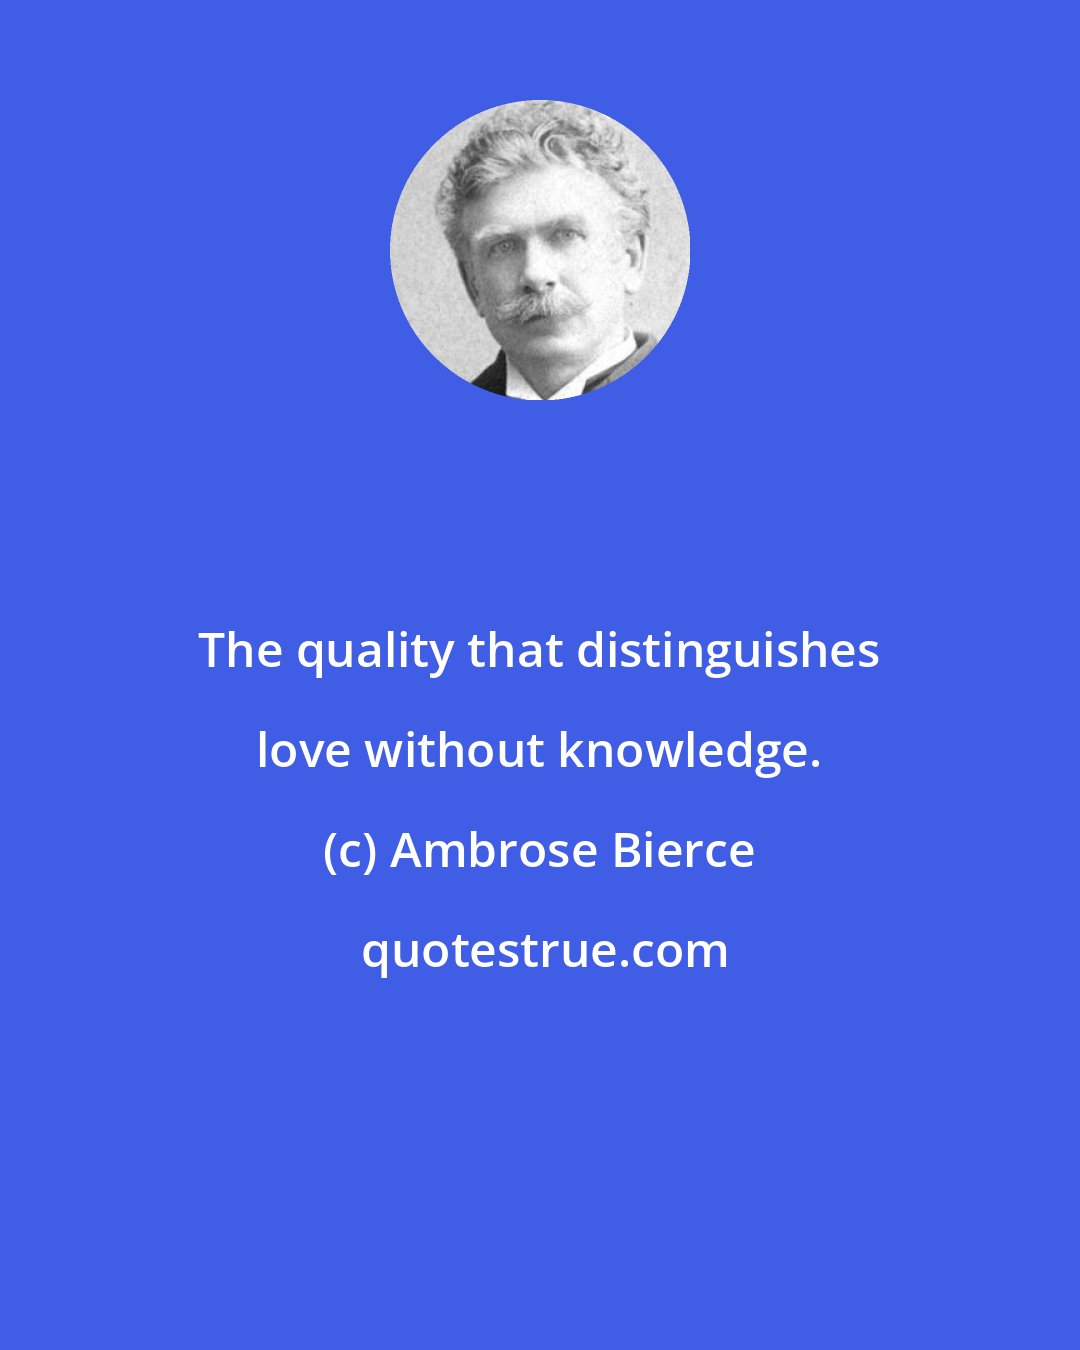 Ambrose Bierce: The quality that distinguishes love without knowledge.